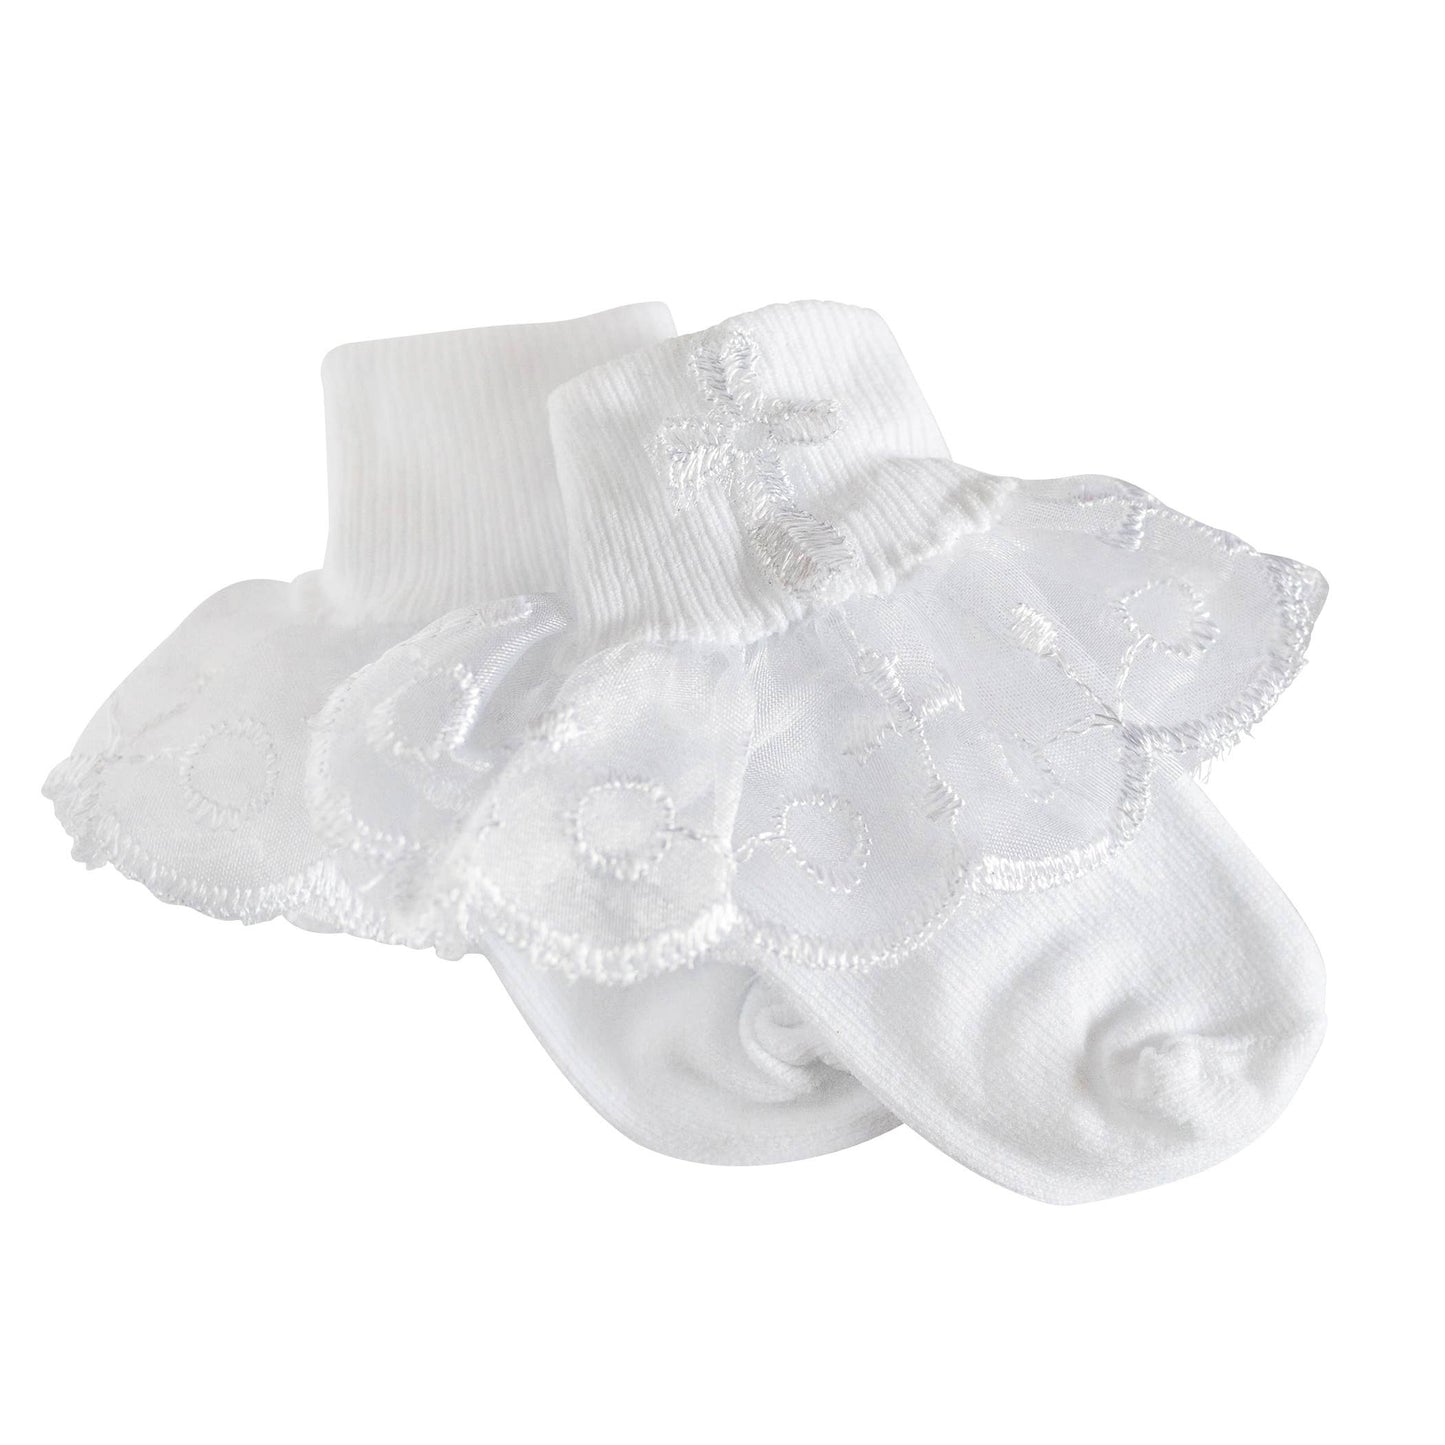 White Baby Girl Lace Baptism or Christening Socks with Cross